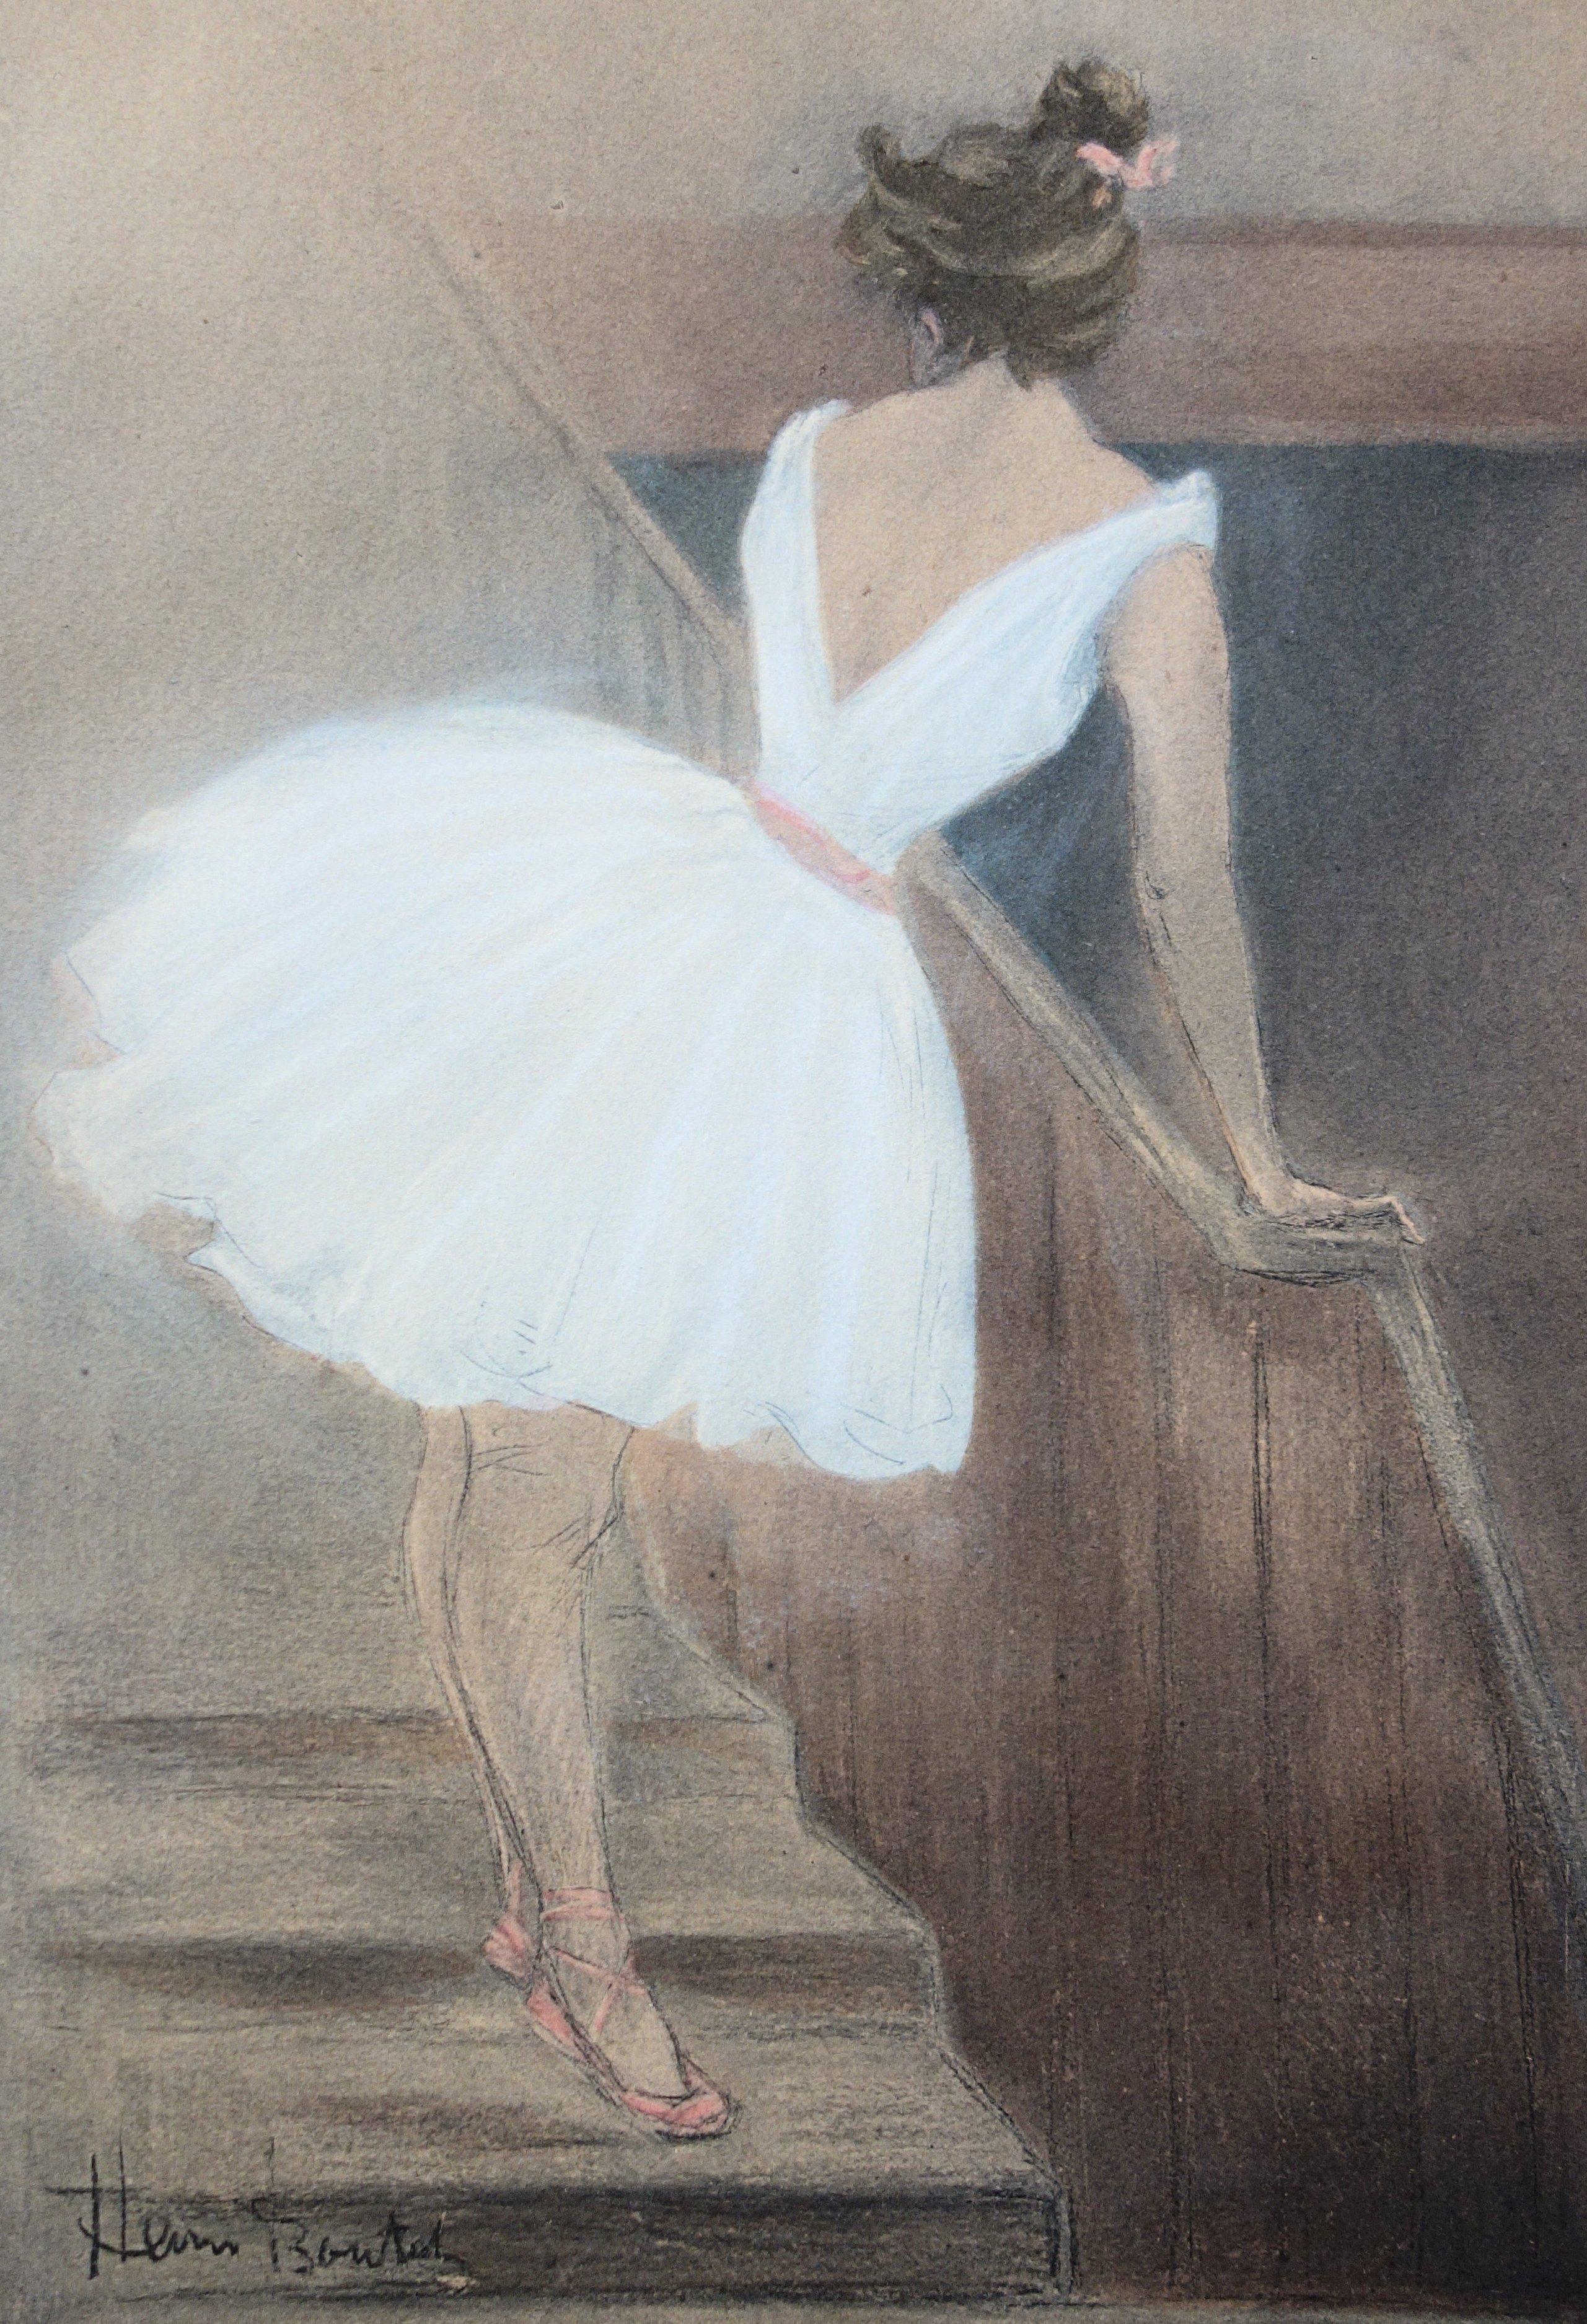 Ballerina in the Stairs - Original lithograph (1897/98) - Art Nouveau Print by Henri Boutet